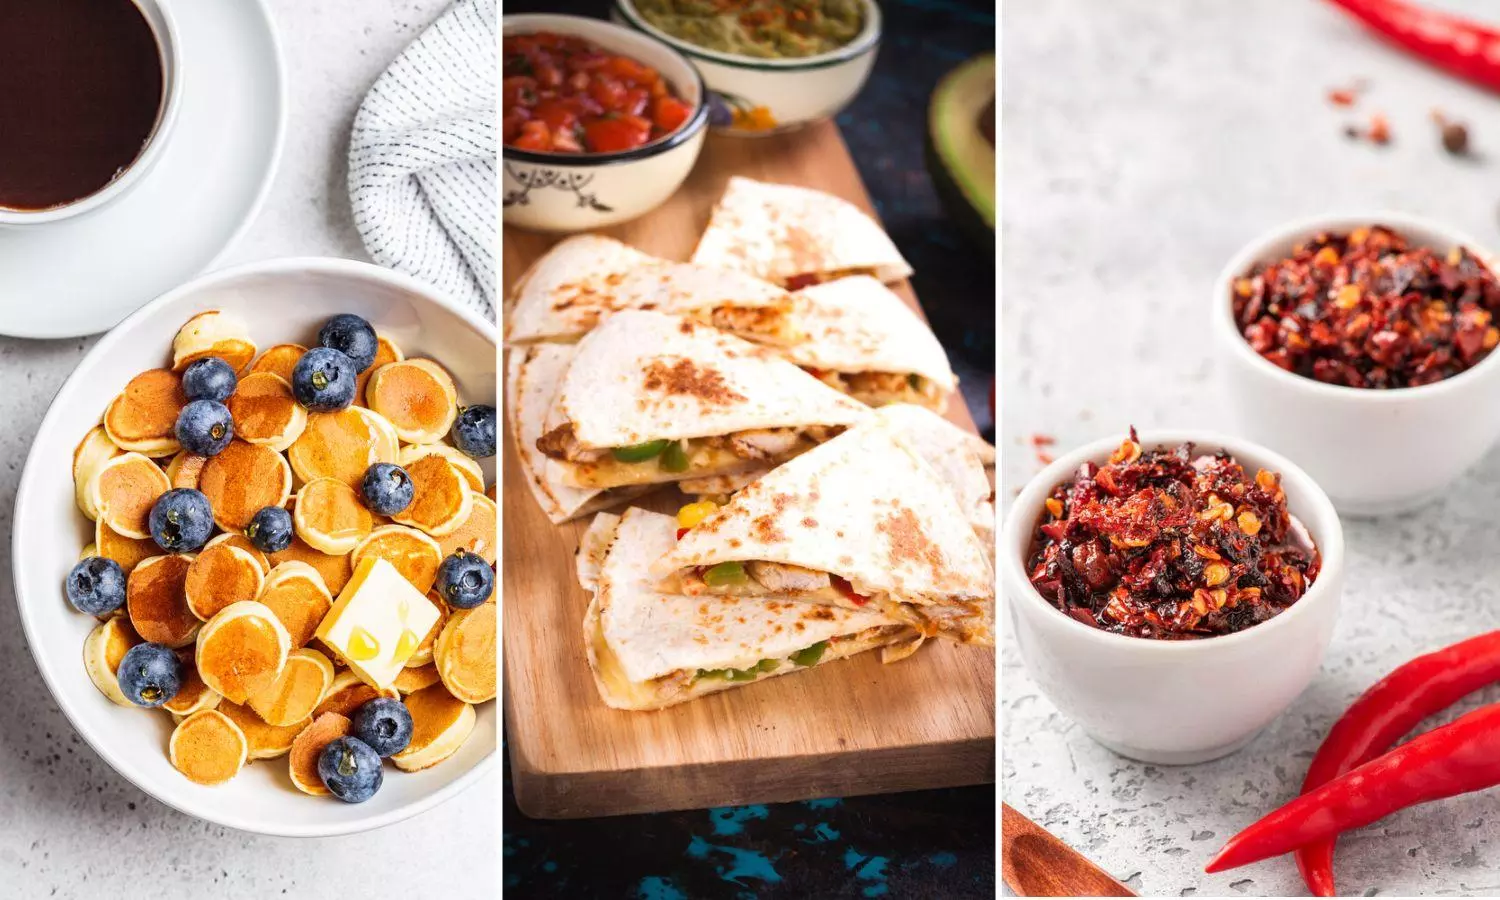 As we hurtle towards 2023, here are all the recipes that took the internet by storm this year